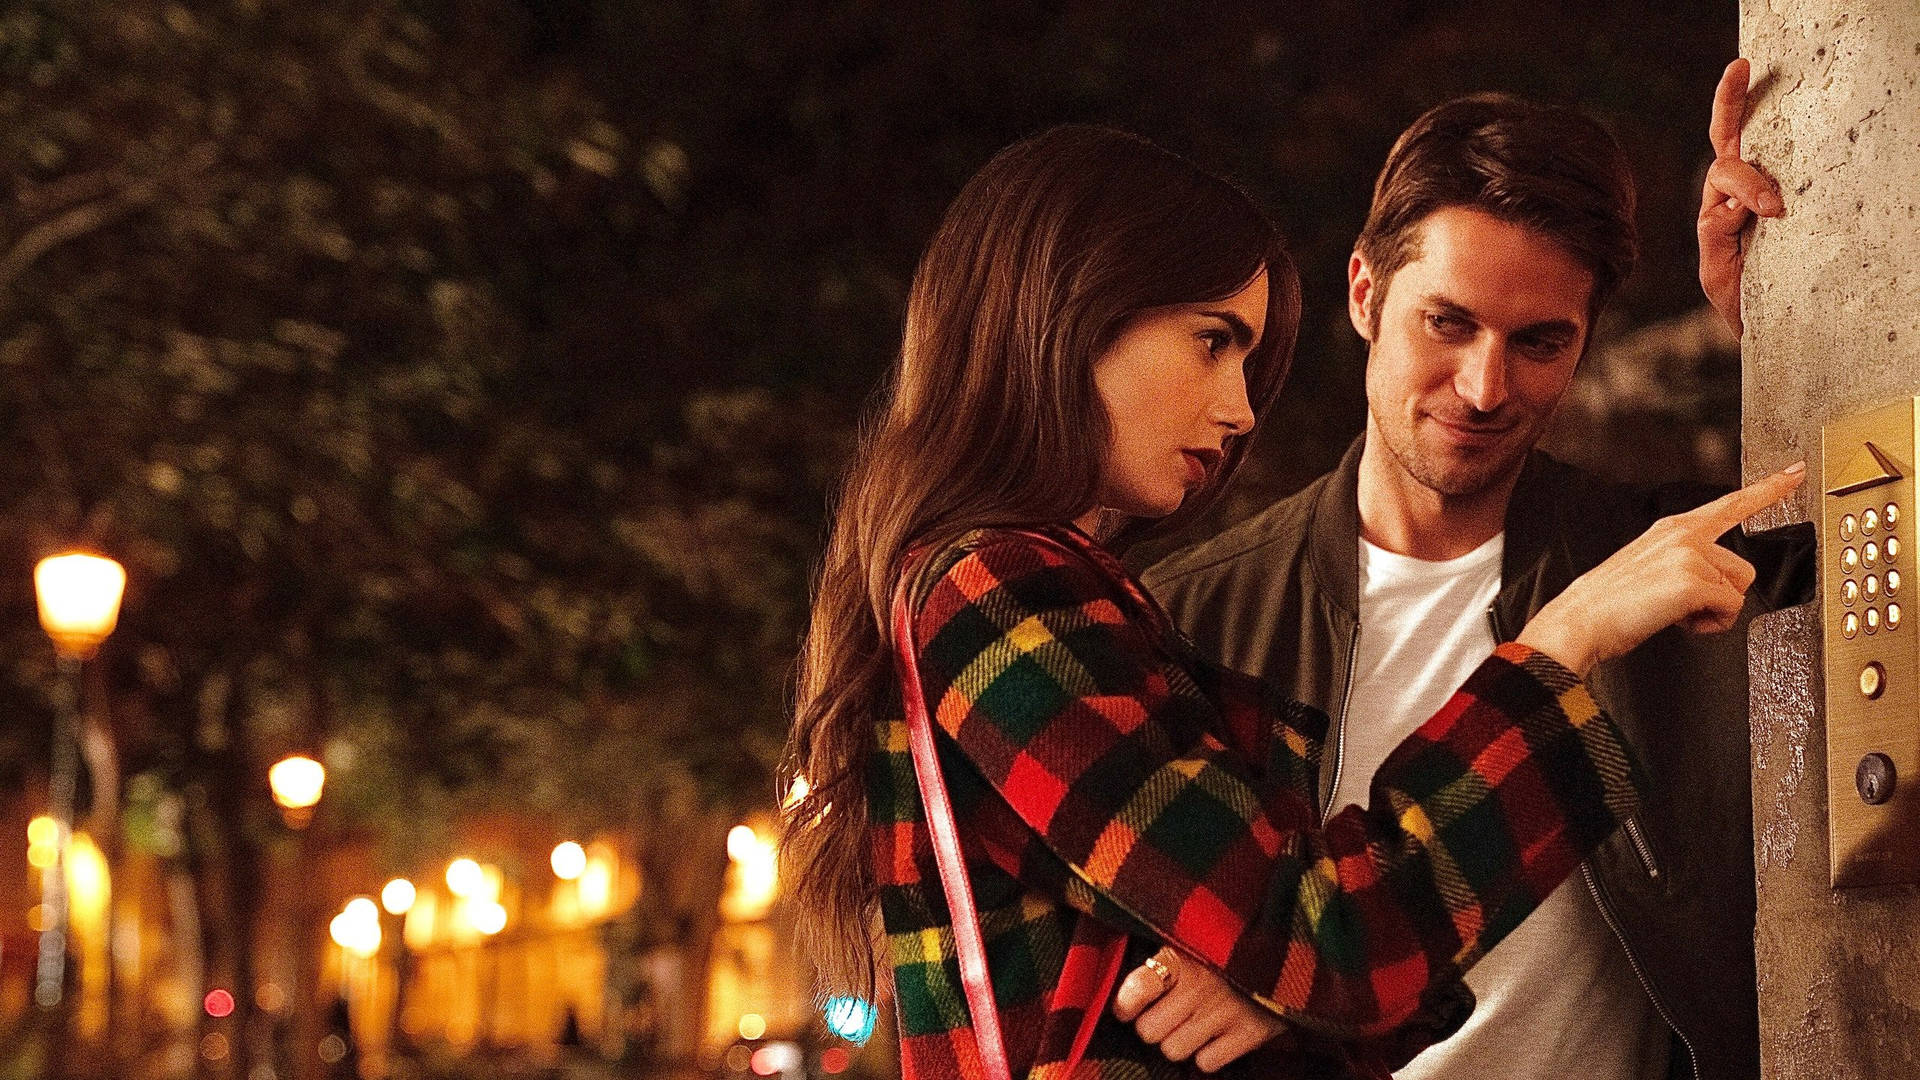 Emily, Played By Lily Collins, And Gabriel, Played By Lucas Bravo, Enjoying A Romantic Moment In Paris. Background